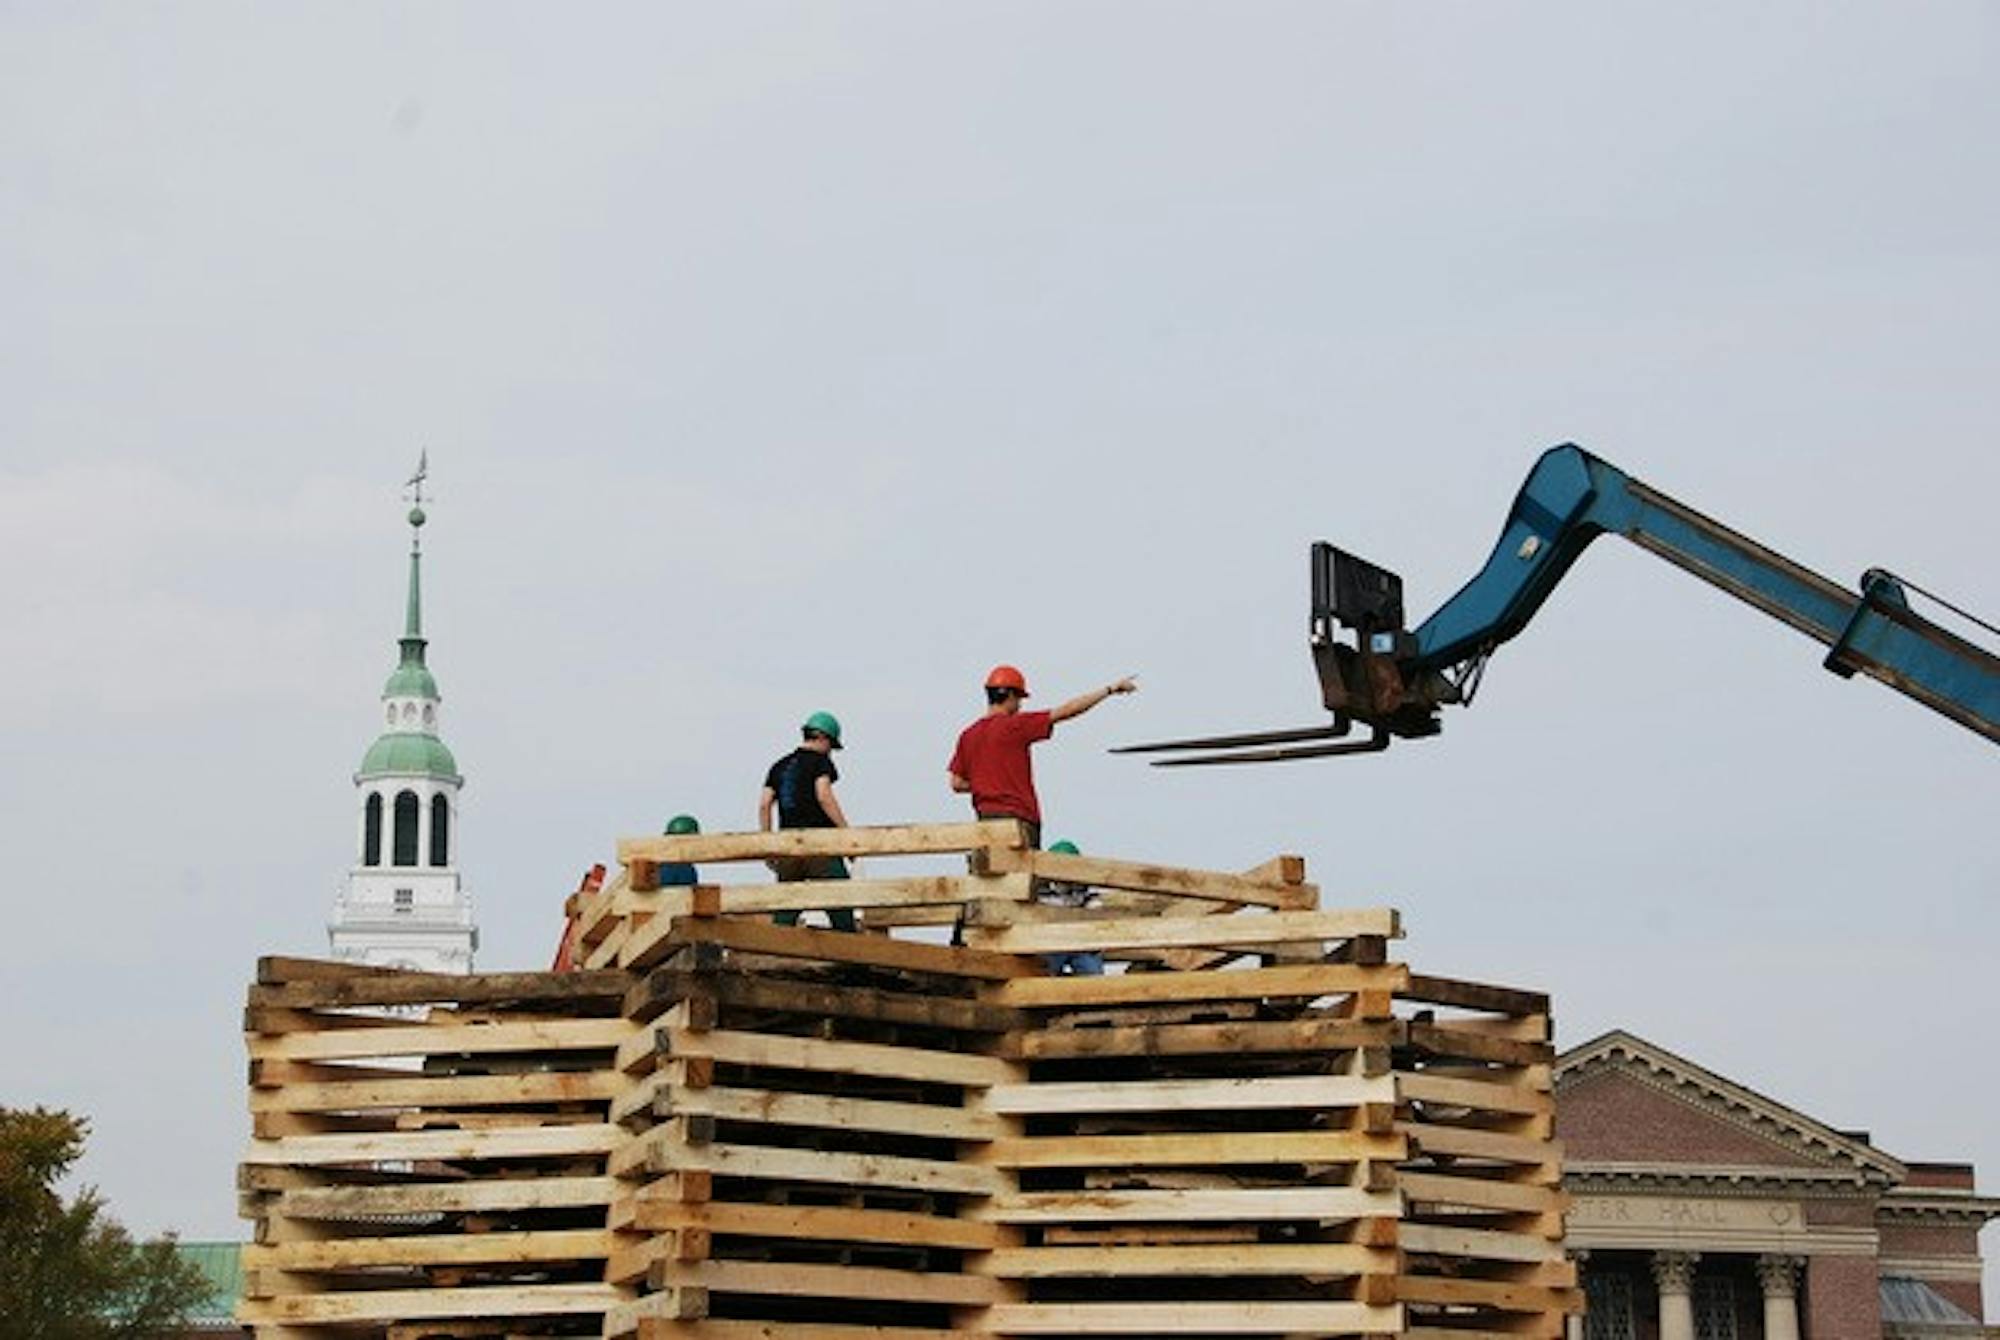 Construction of the bonfire proceeds Thursday afternoon.